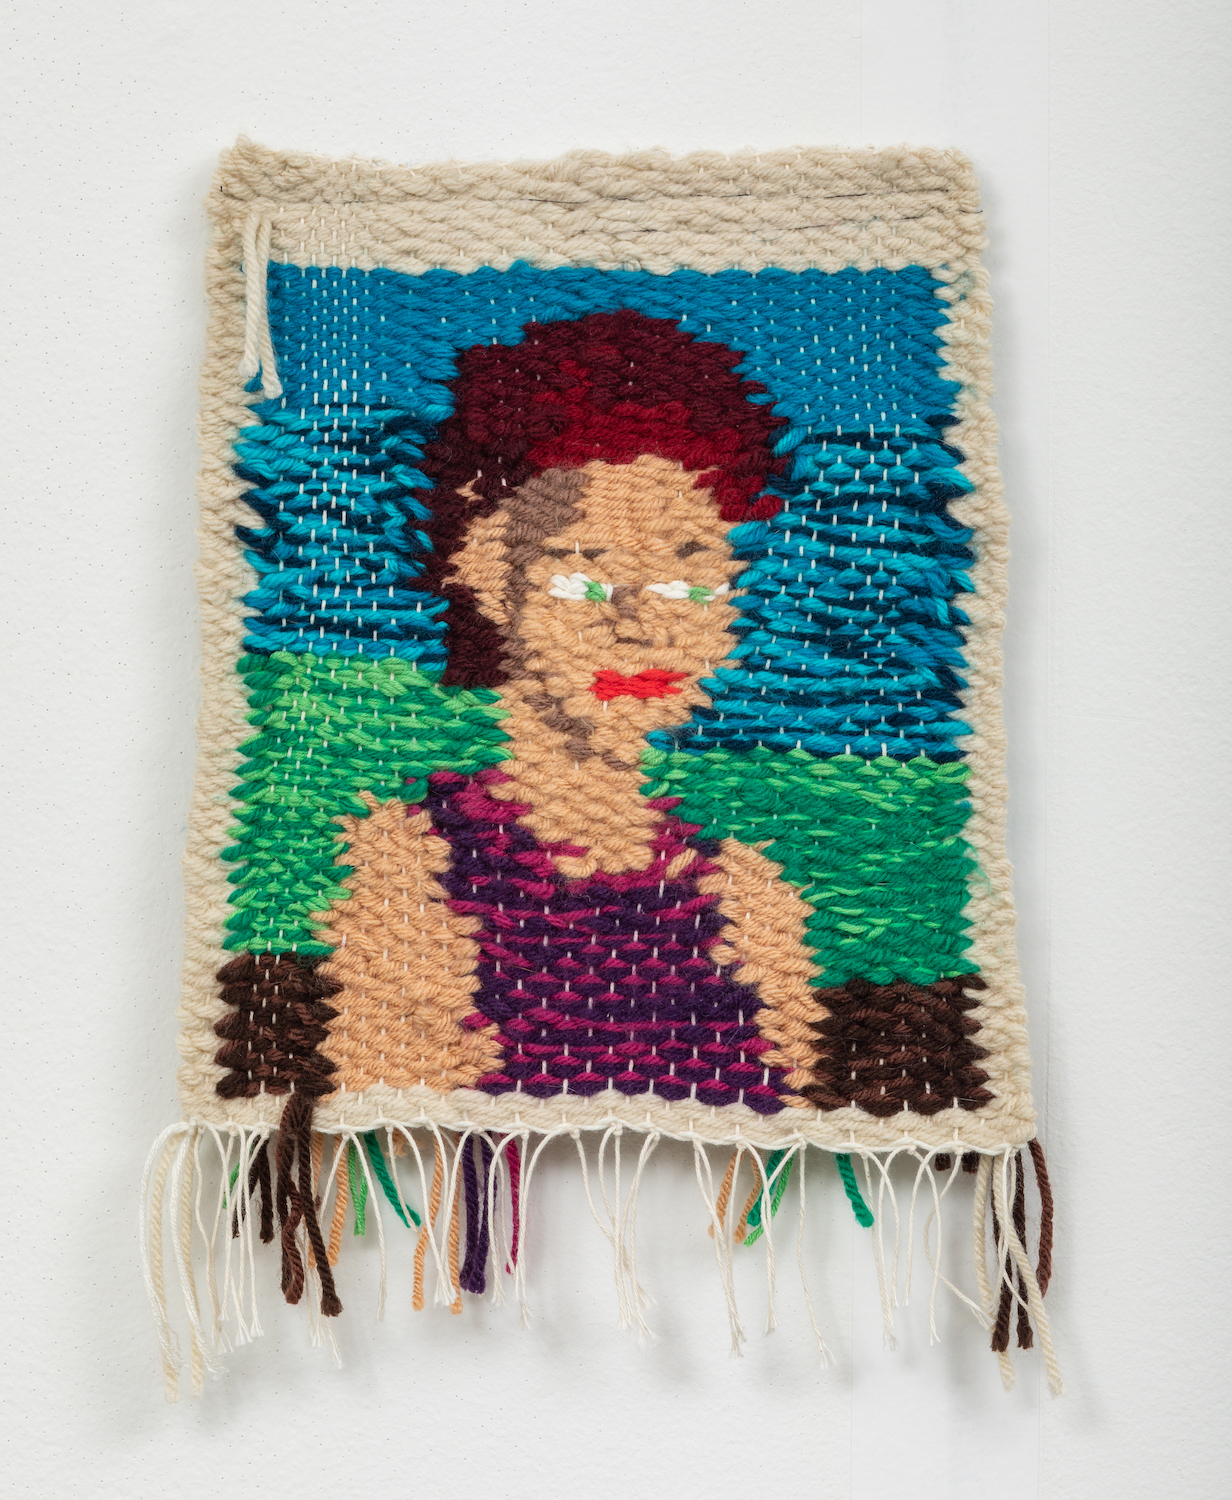 D'ANGELO LOVELL WILLIAMS, The Overlook (Mom 1989/90), 2023, cotton yarn, acrylic yarn, 10.5 x 8.5 inches, unique